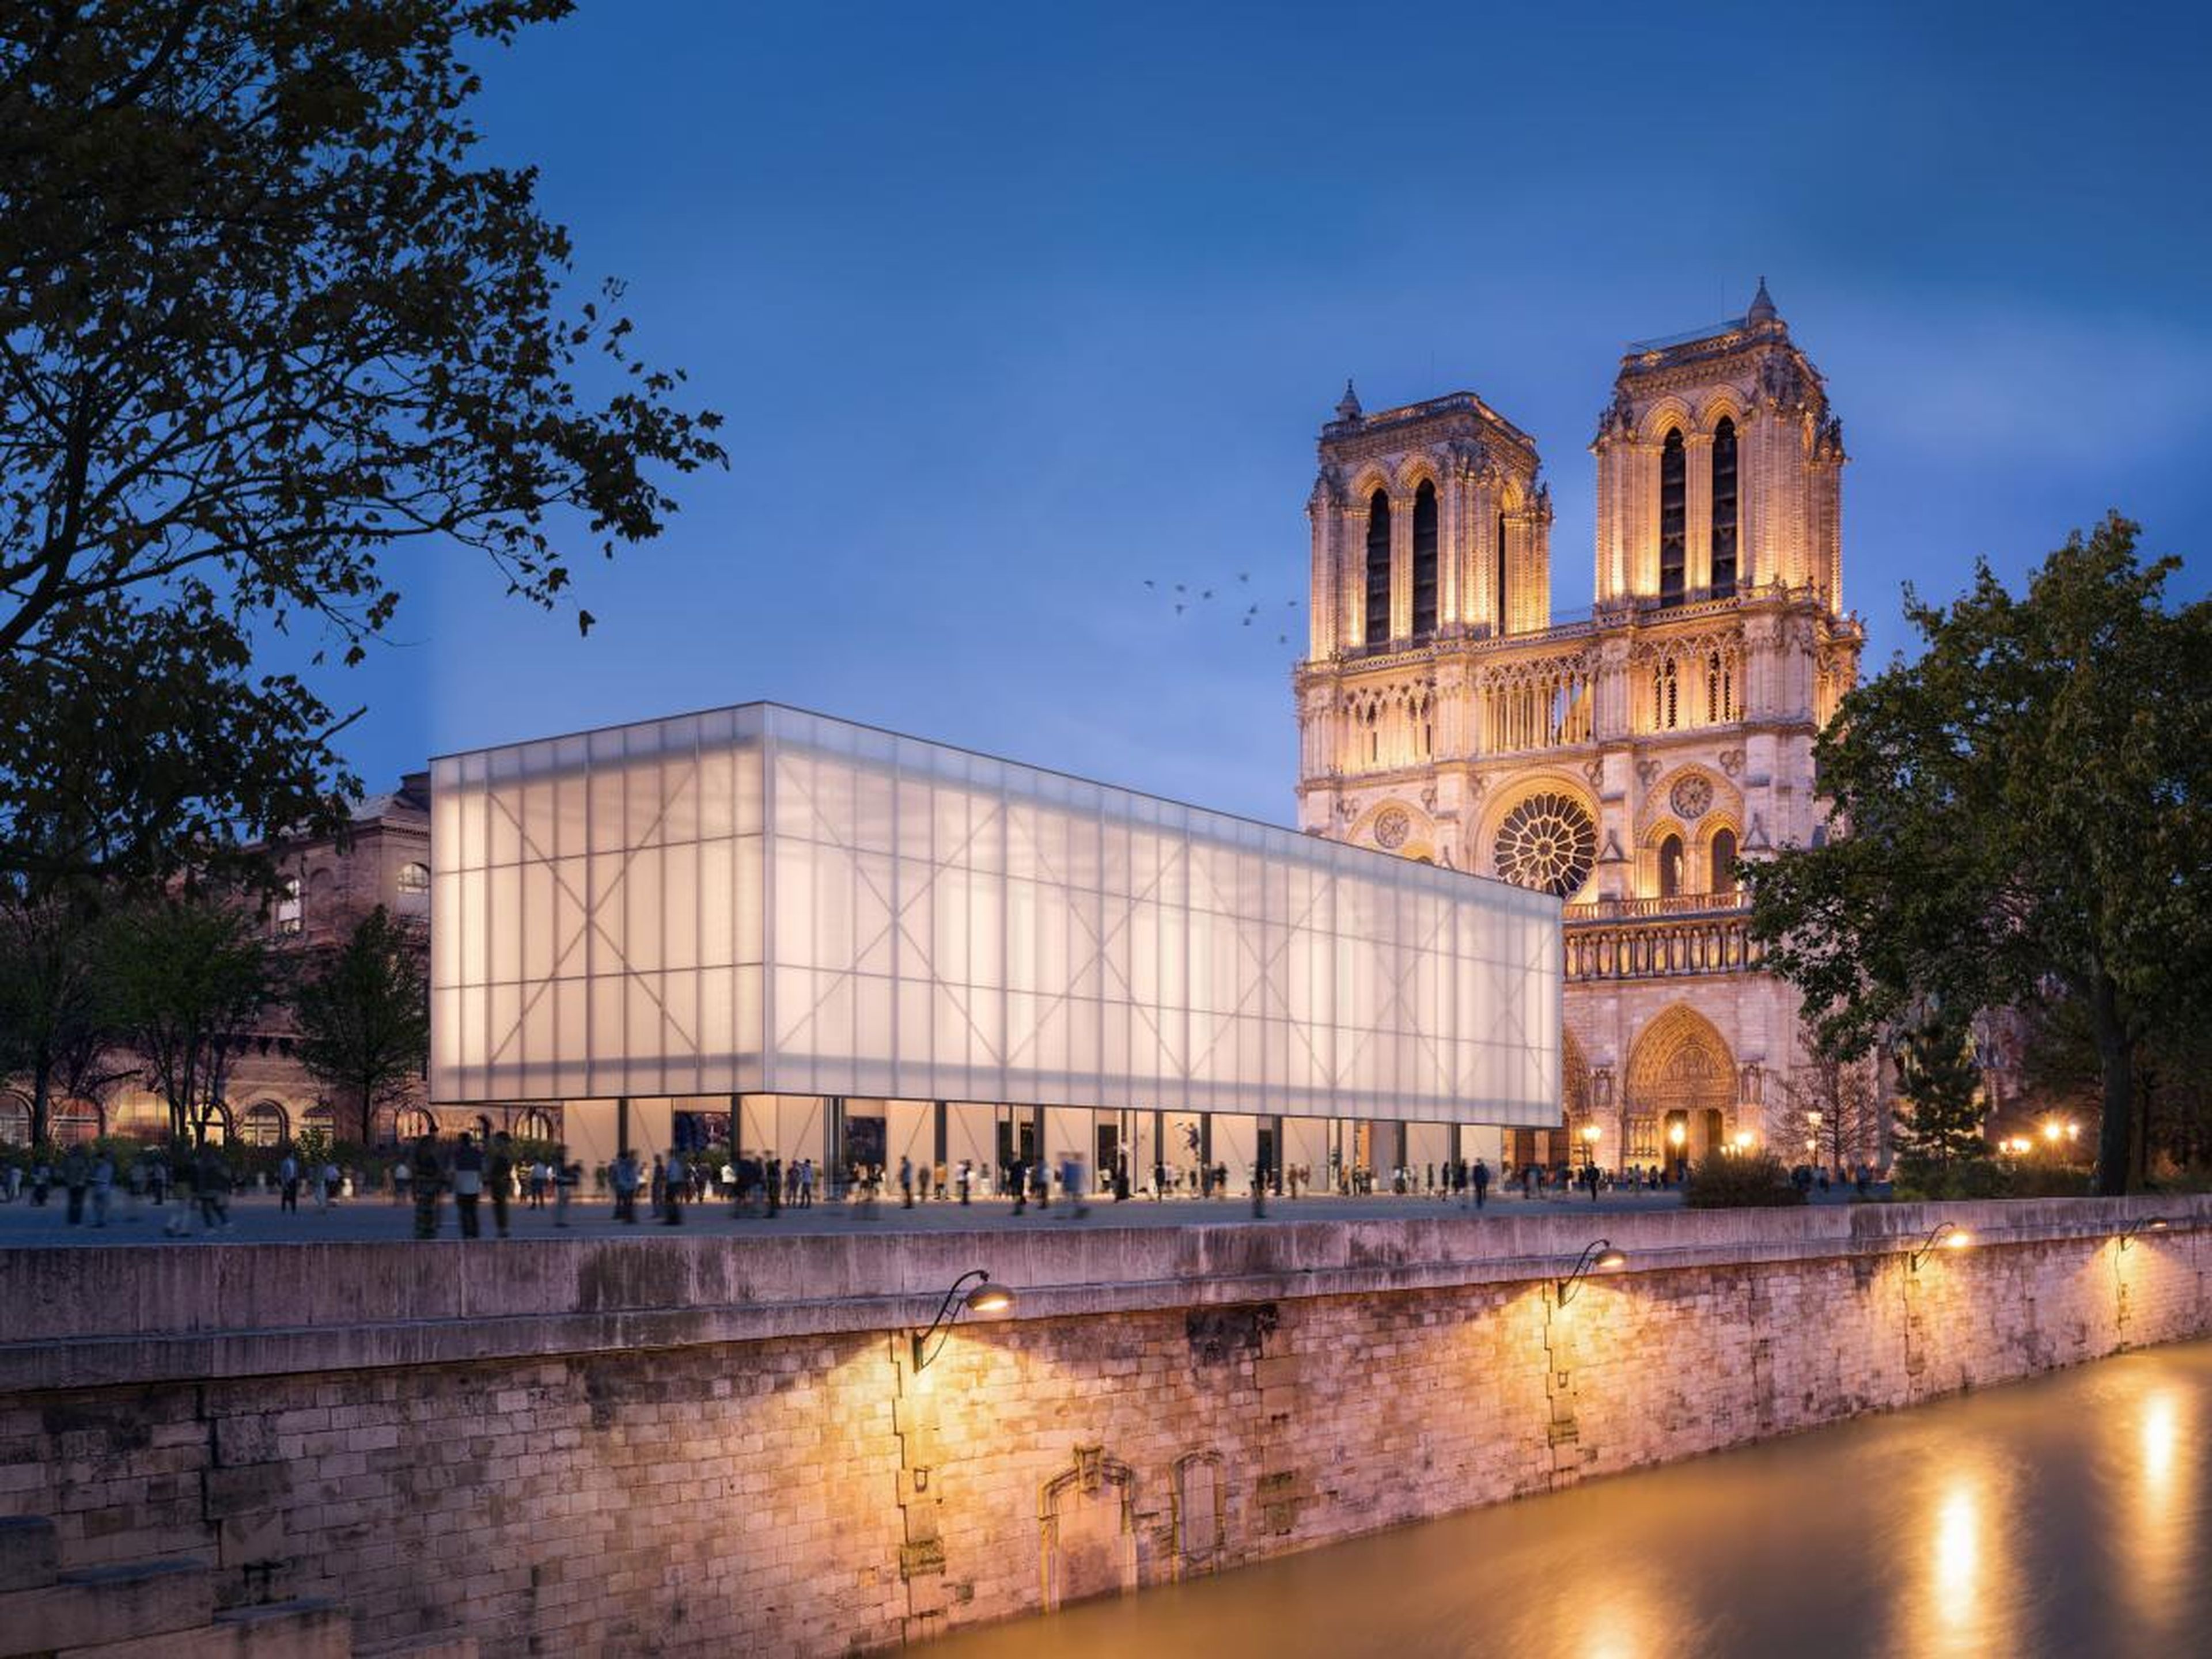 The global architecture firm Gensler has unveiled a concept for a pop-up worship center made of charred timber outside the cathedral.